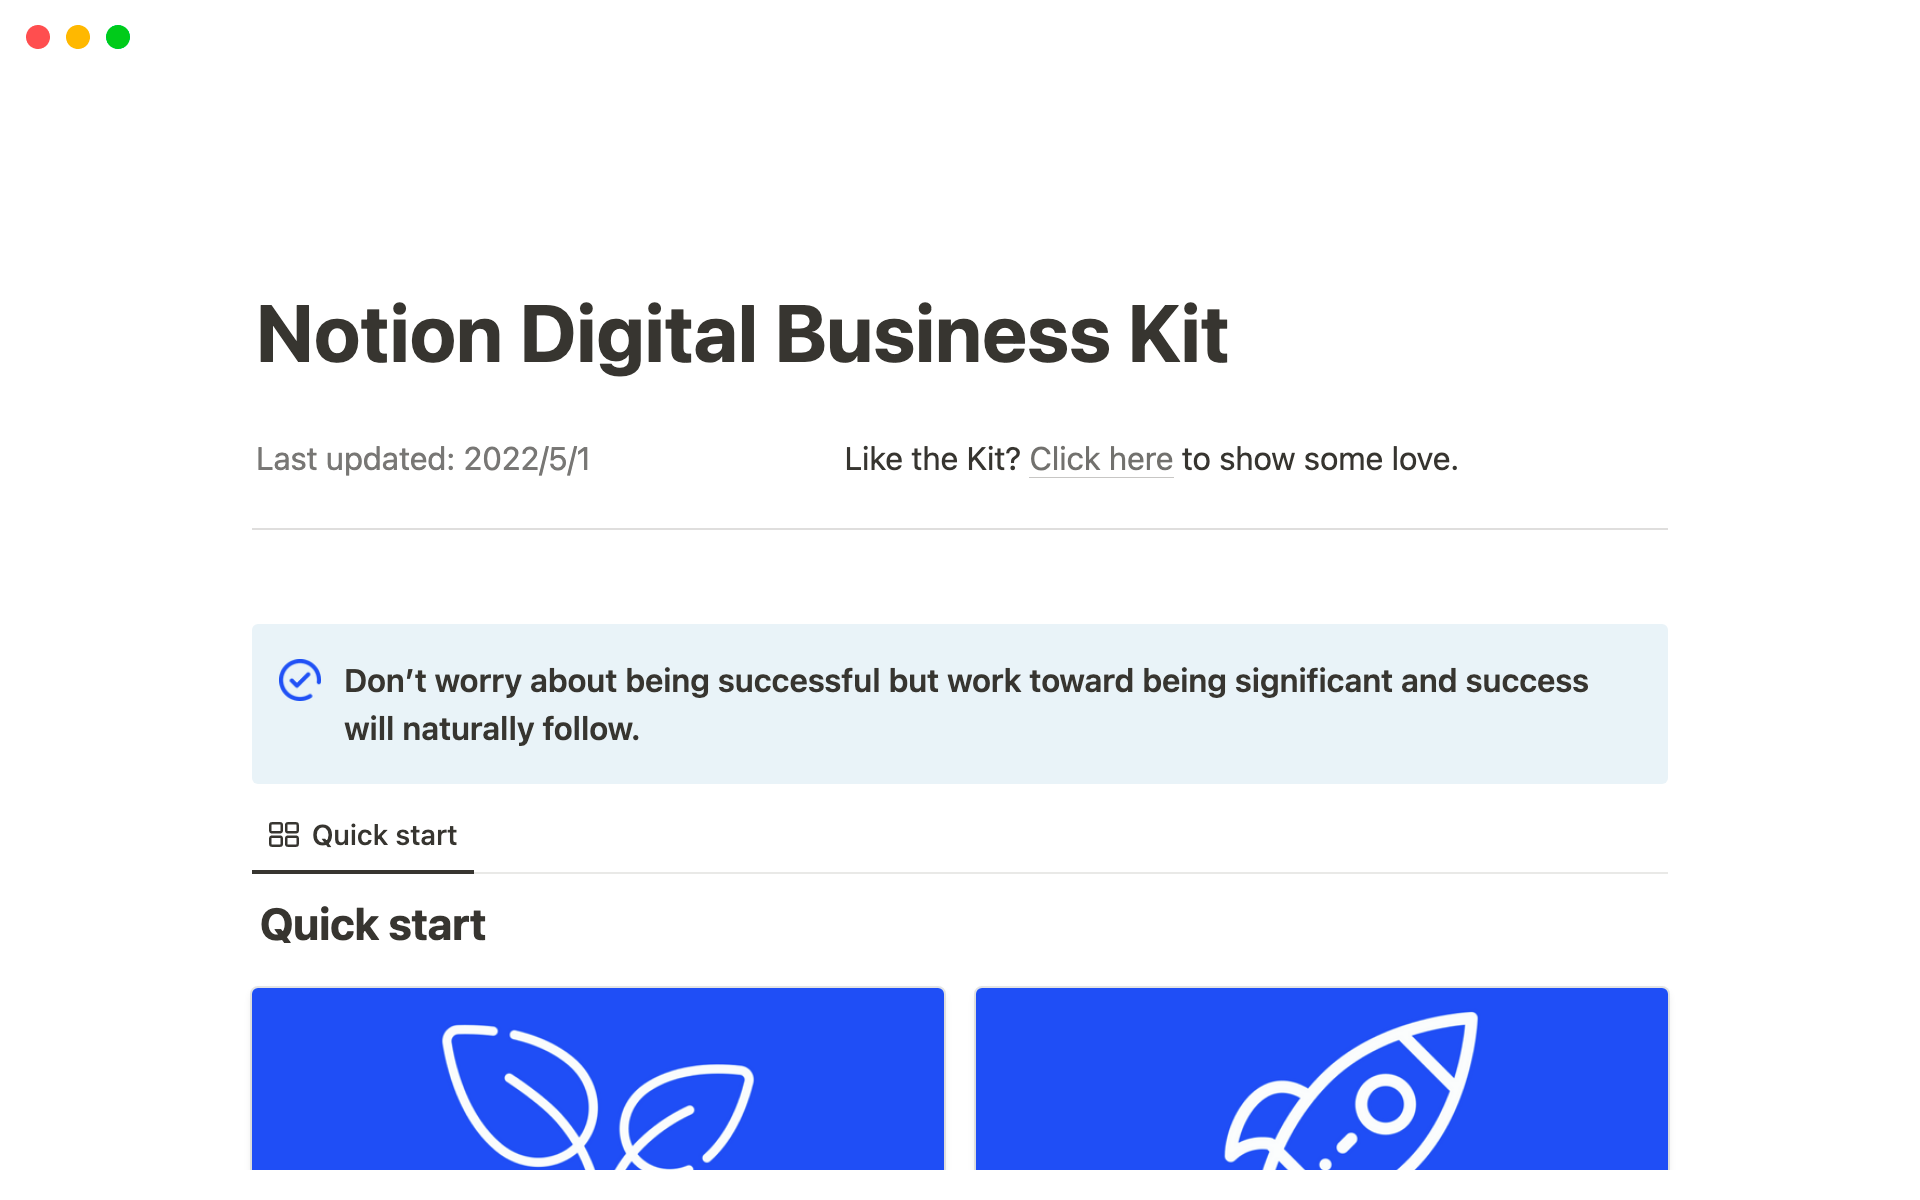 In Notion Digital Business Kit you will find everything you need to know and have as a successful digital business owner.